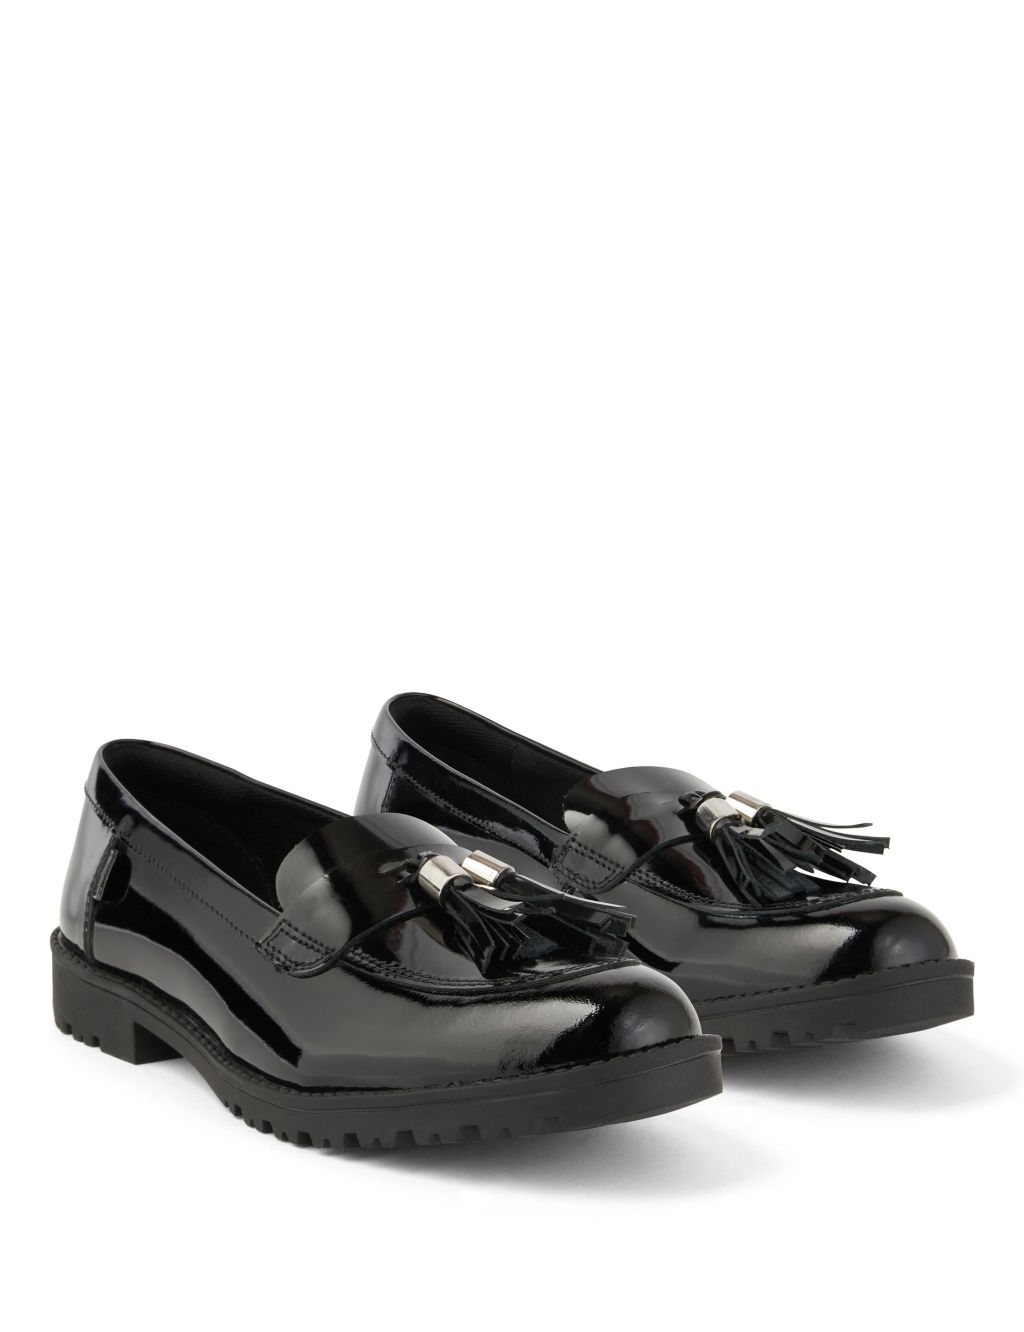 Leather Patent Tassel Loafers image 2